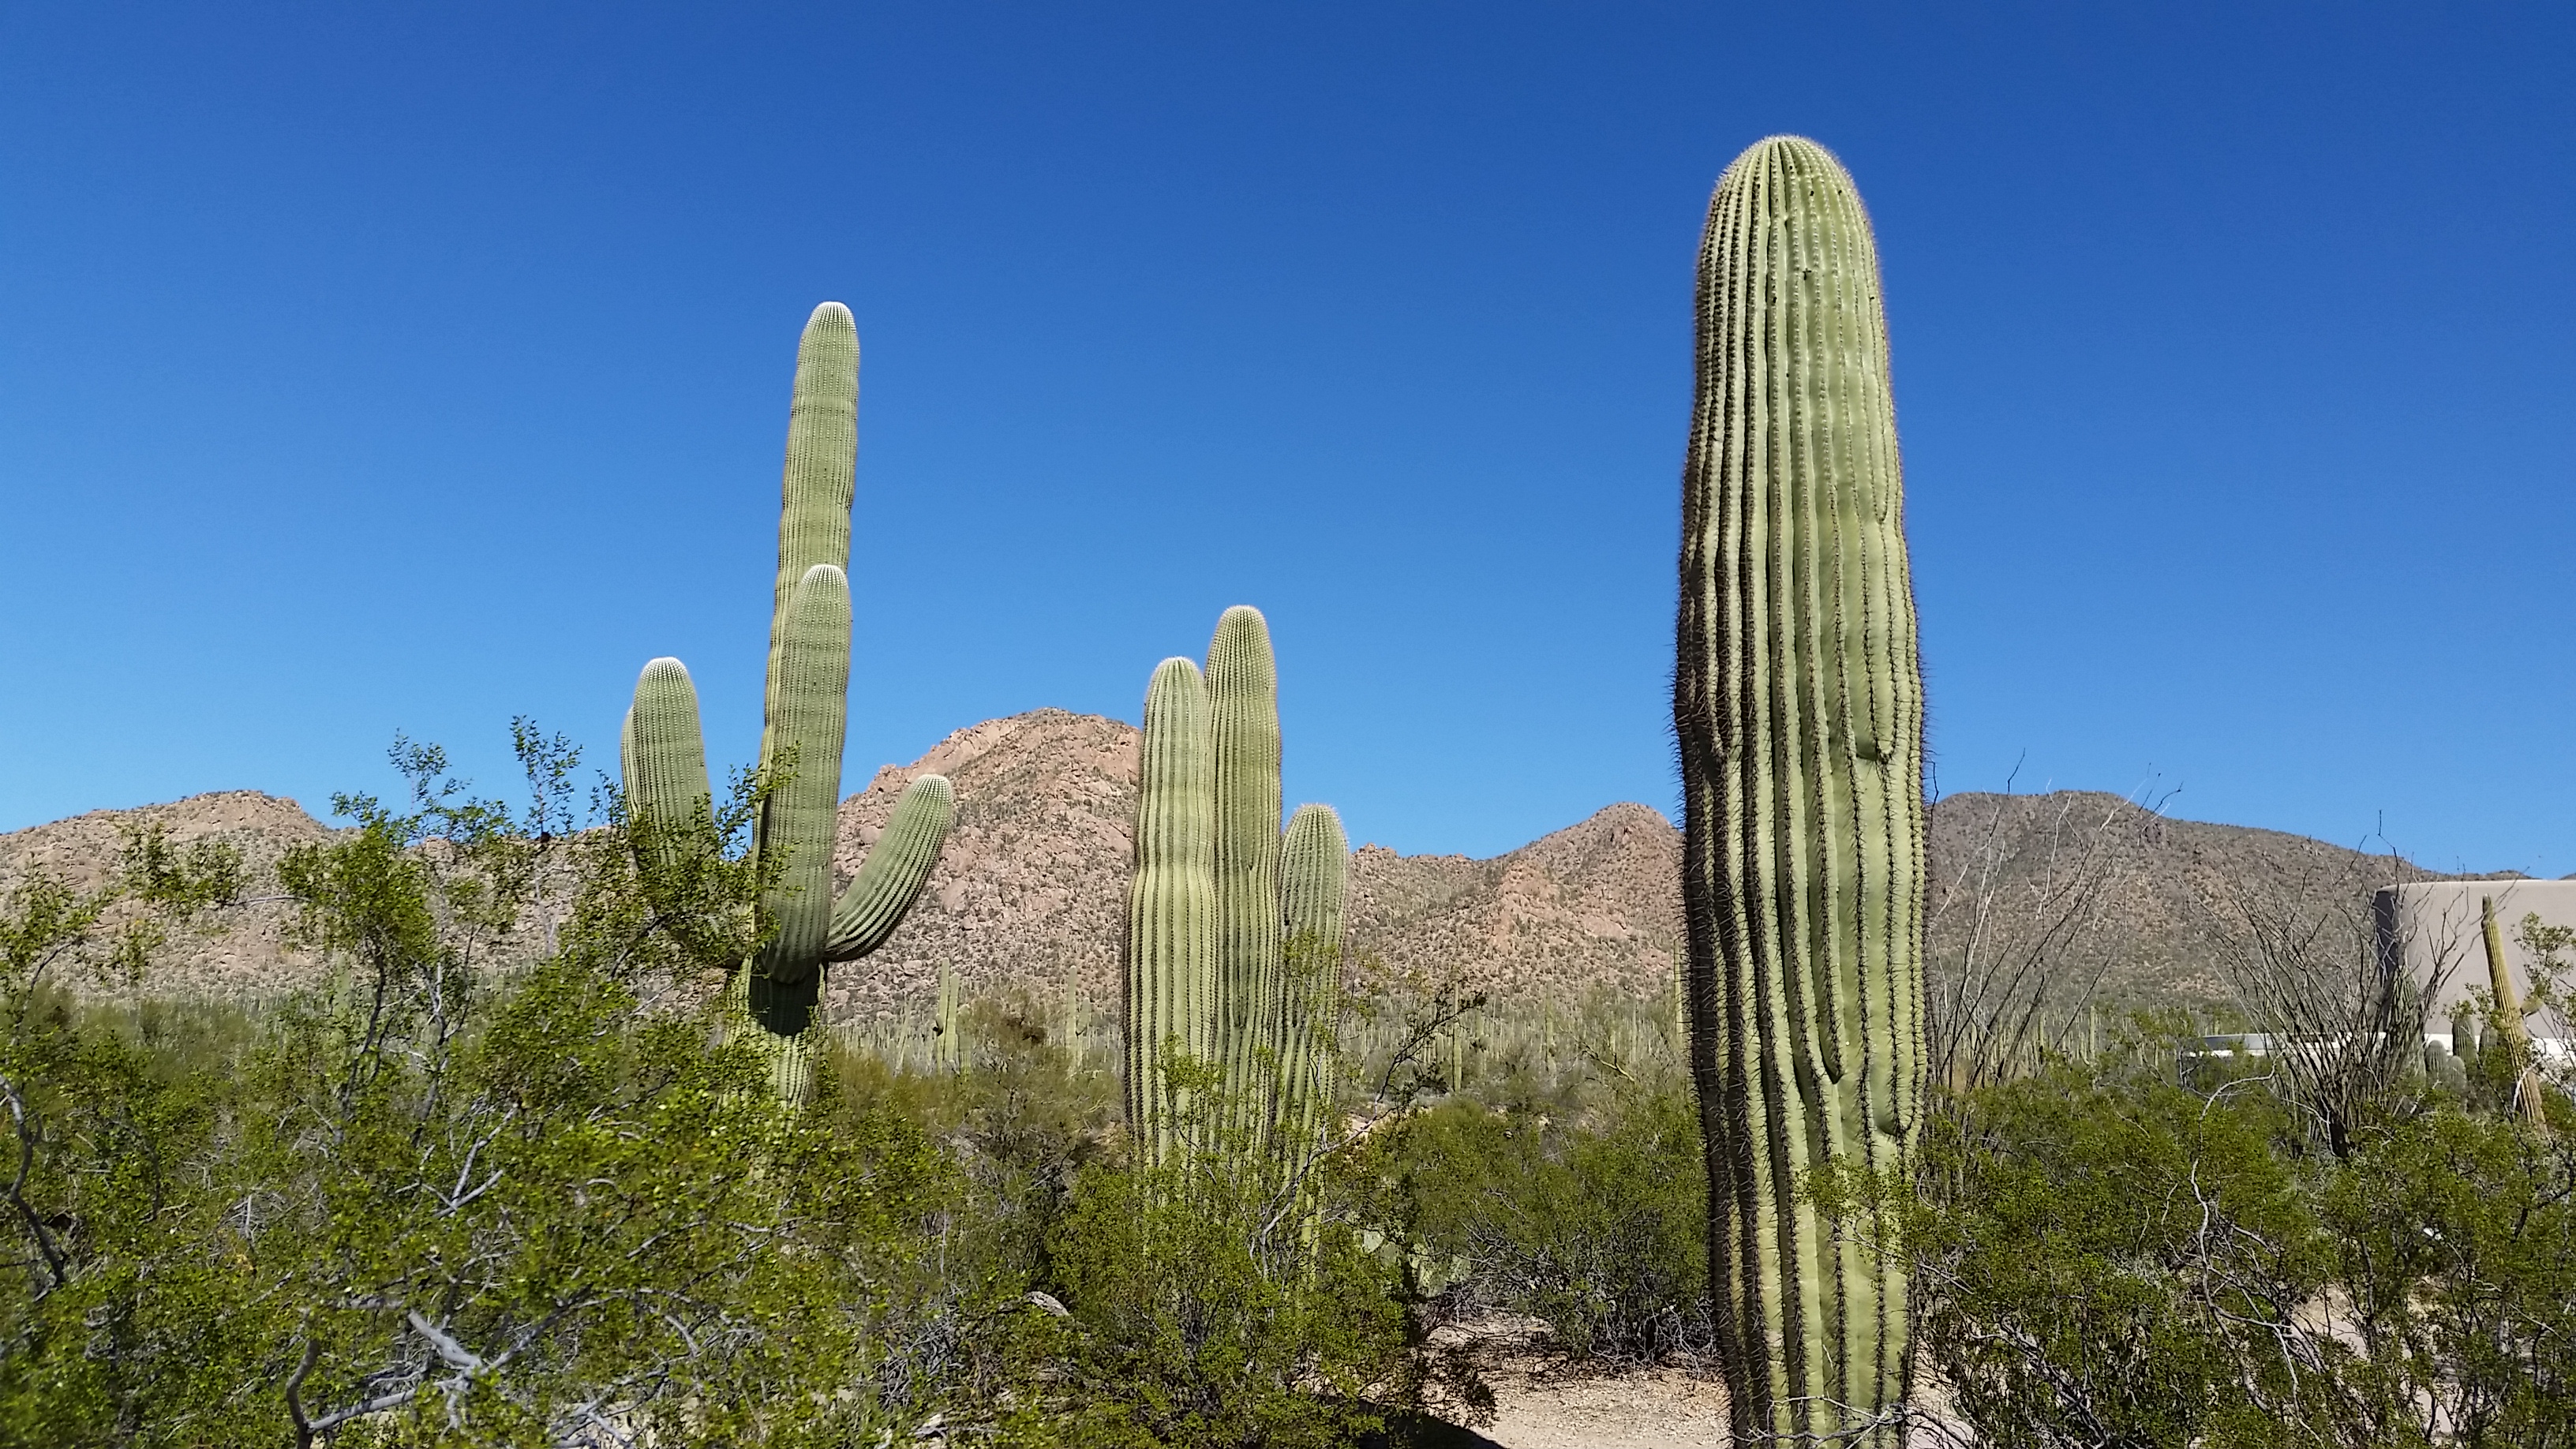 Saguaros thrive in Tucson's dry climate